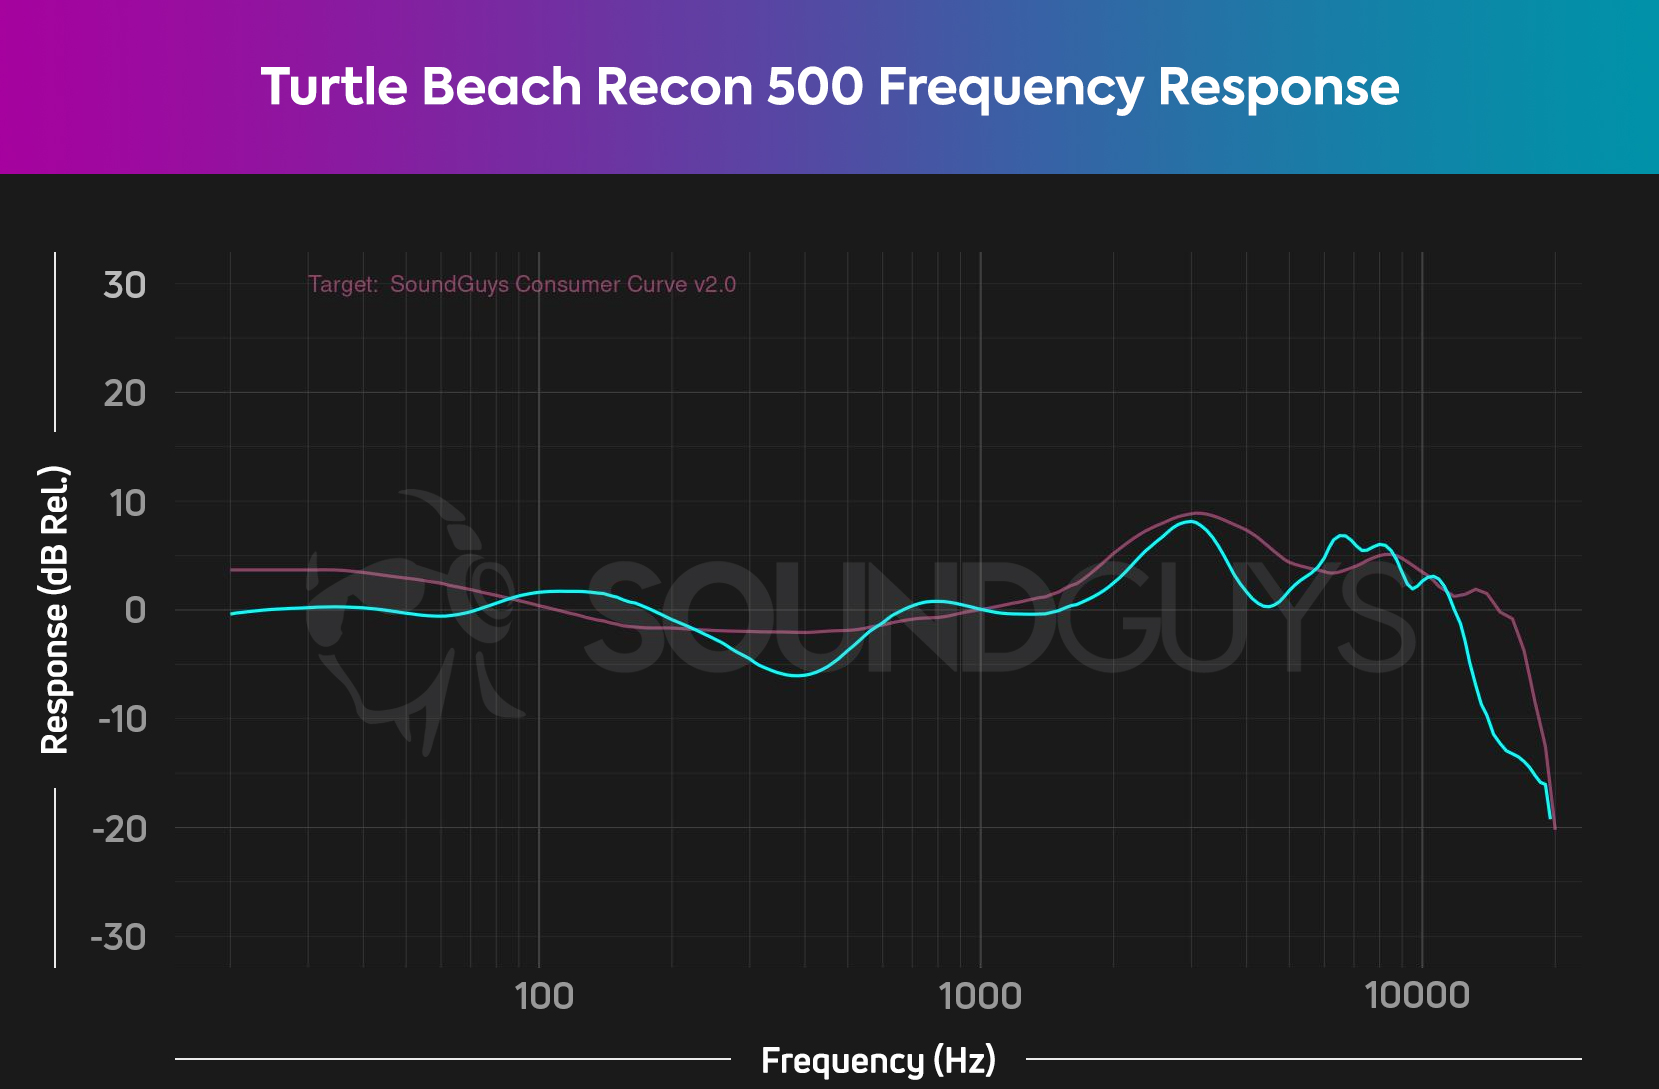 Frequency response chart of Turtle Beach Recon 500 as compared to our ideal consumer curve.